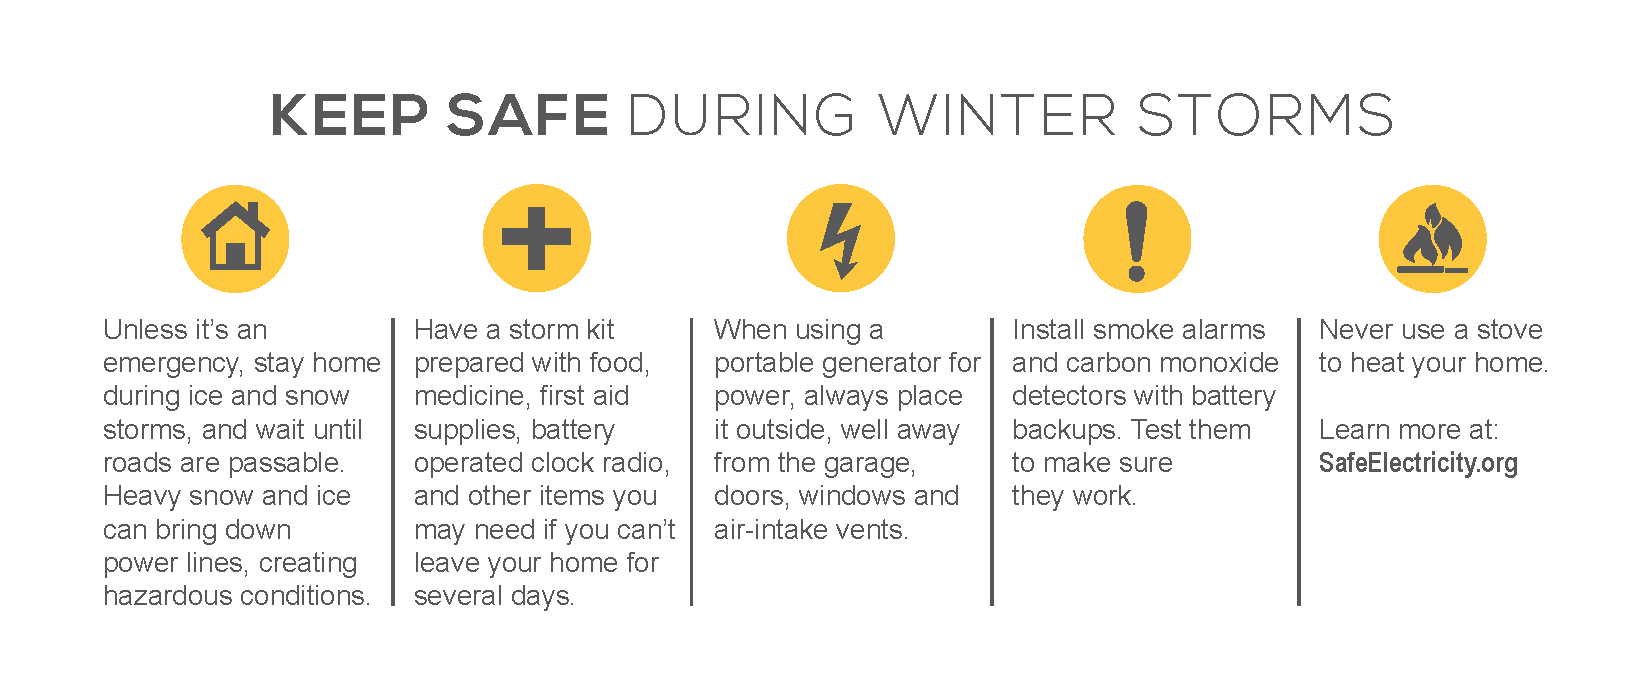 Keep Safe During Winter Storms